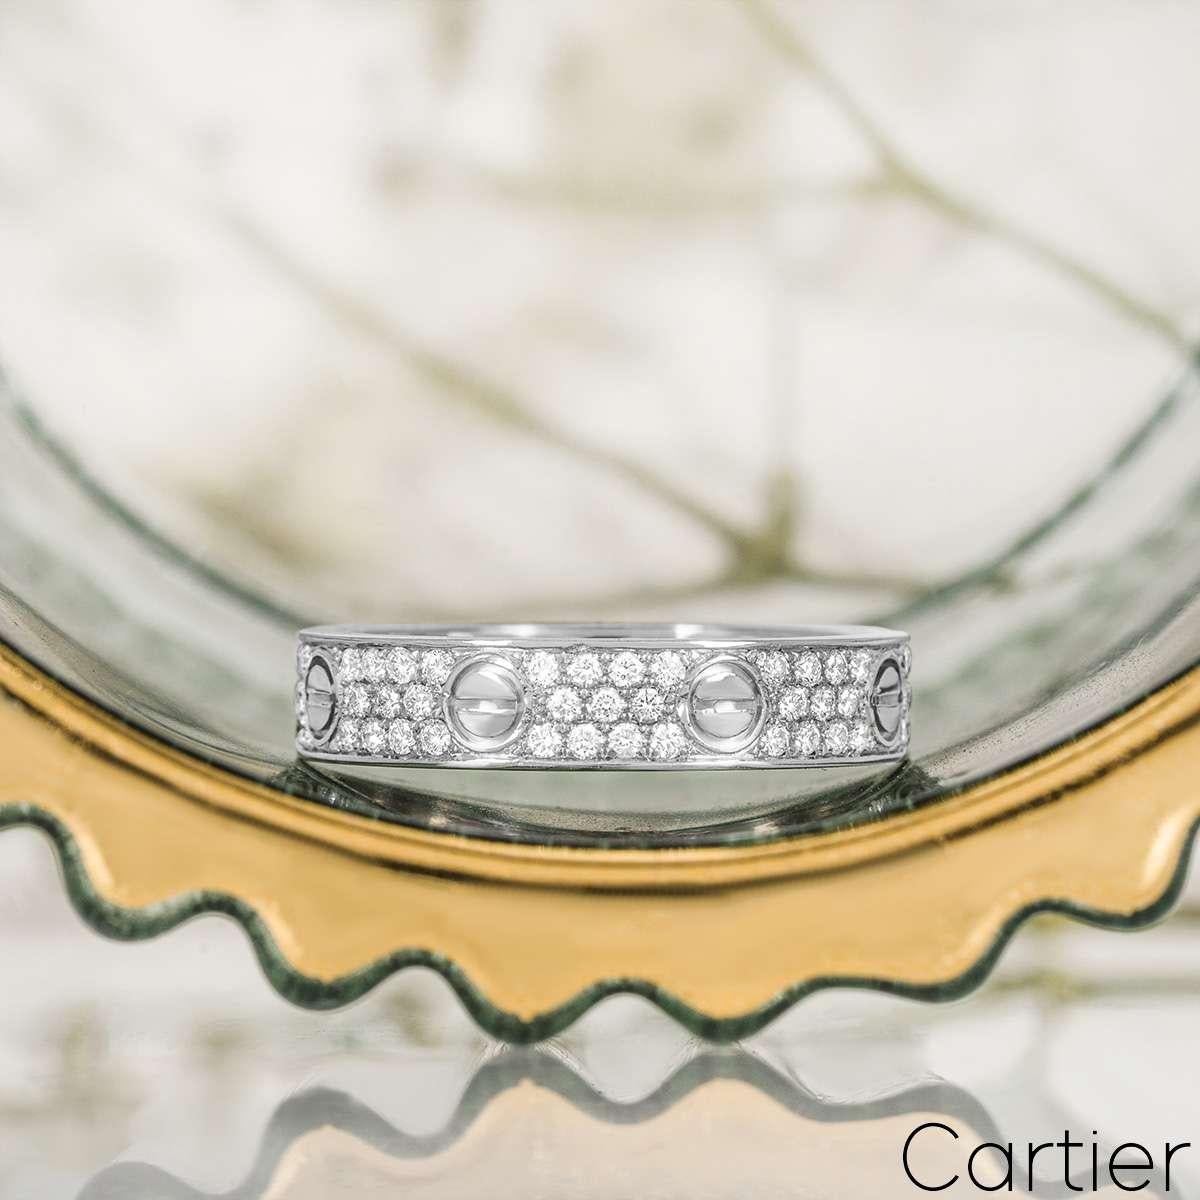 Cartier White Gold Pave Diamond Wedding Love Ring Size 54 B4083400 In Excellent Condition For Sale In London, GB